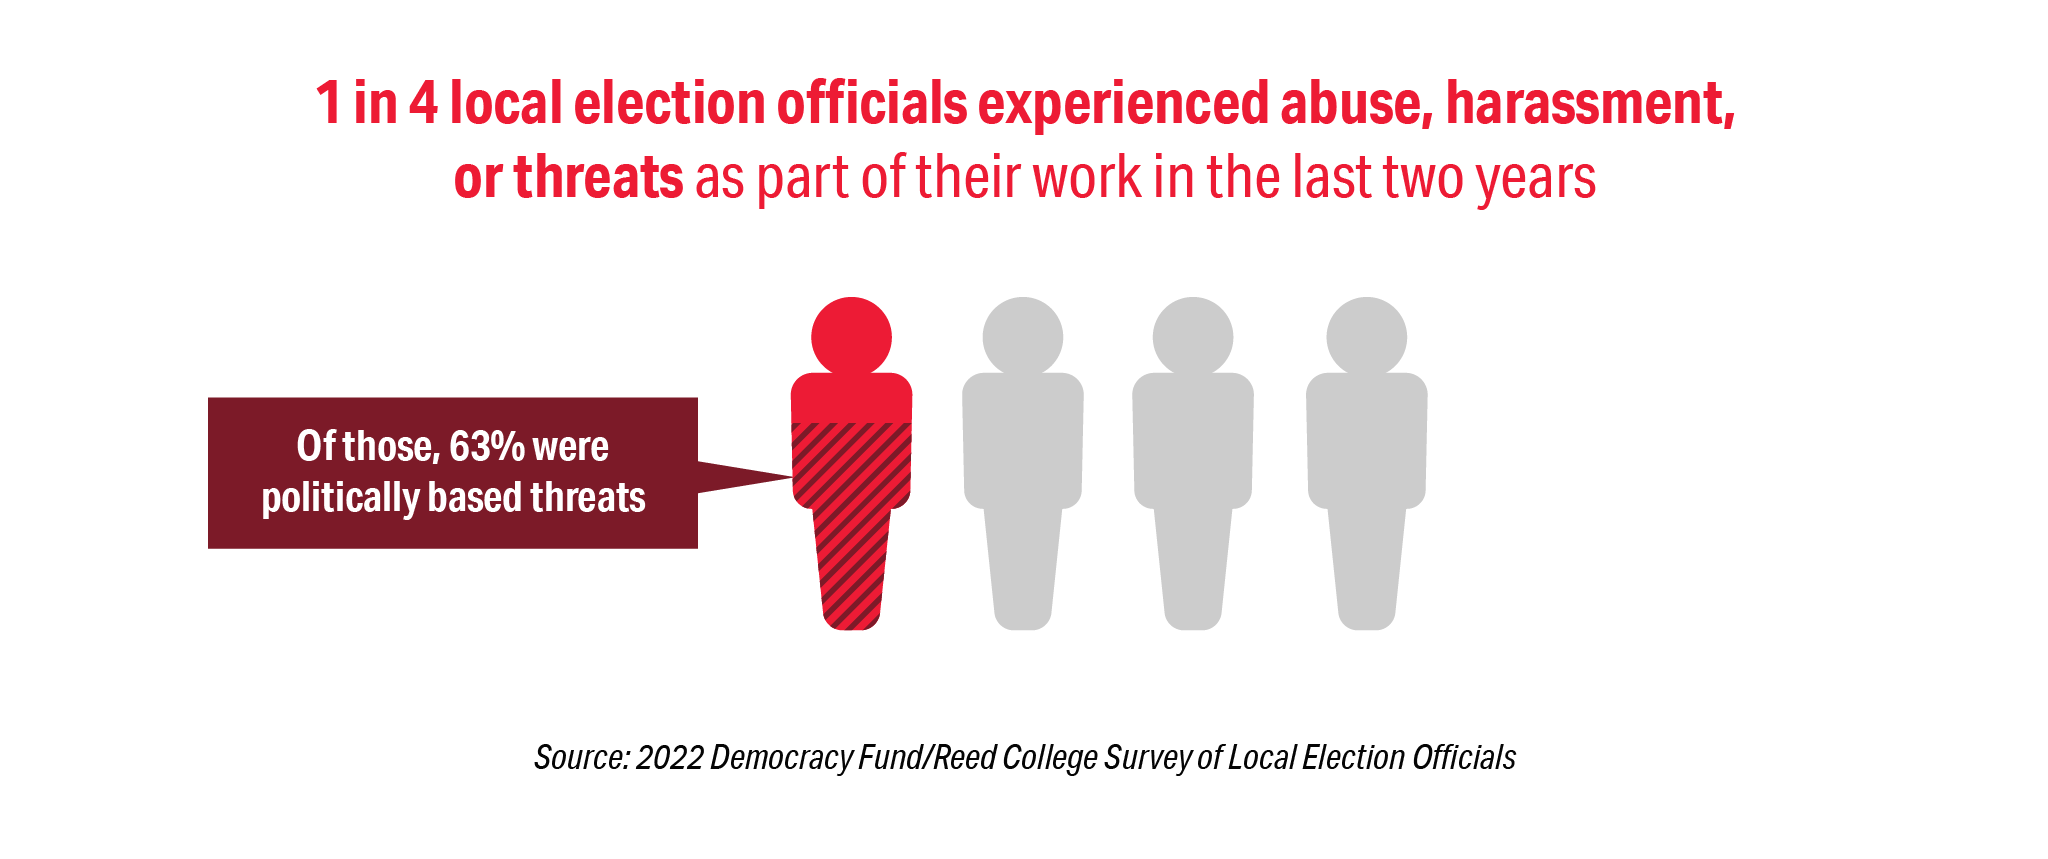 Graph stating that 1 in 4 local election officials experienced abuse or threats as part of their work in the last 2 years. 63% were politically-based.